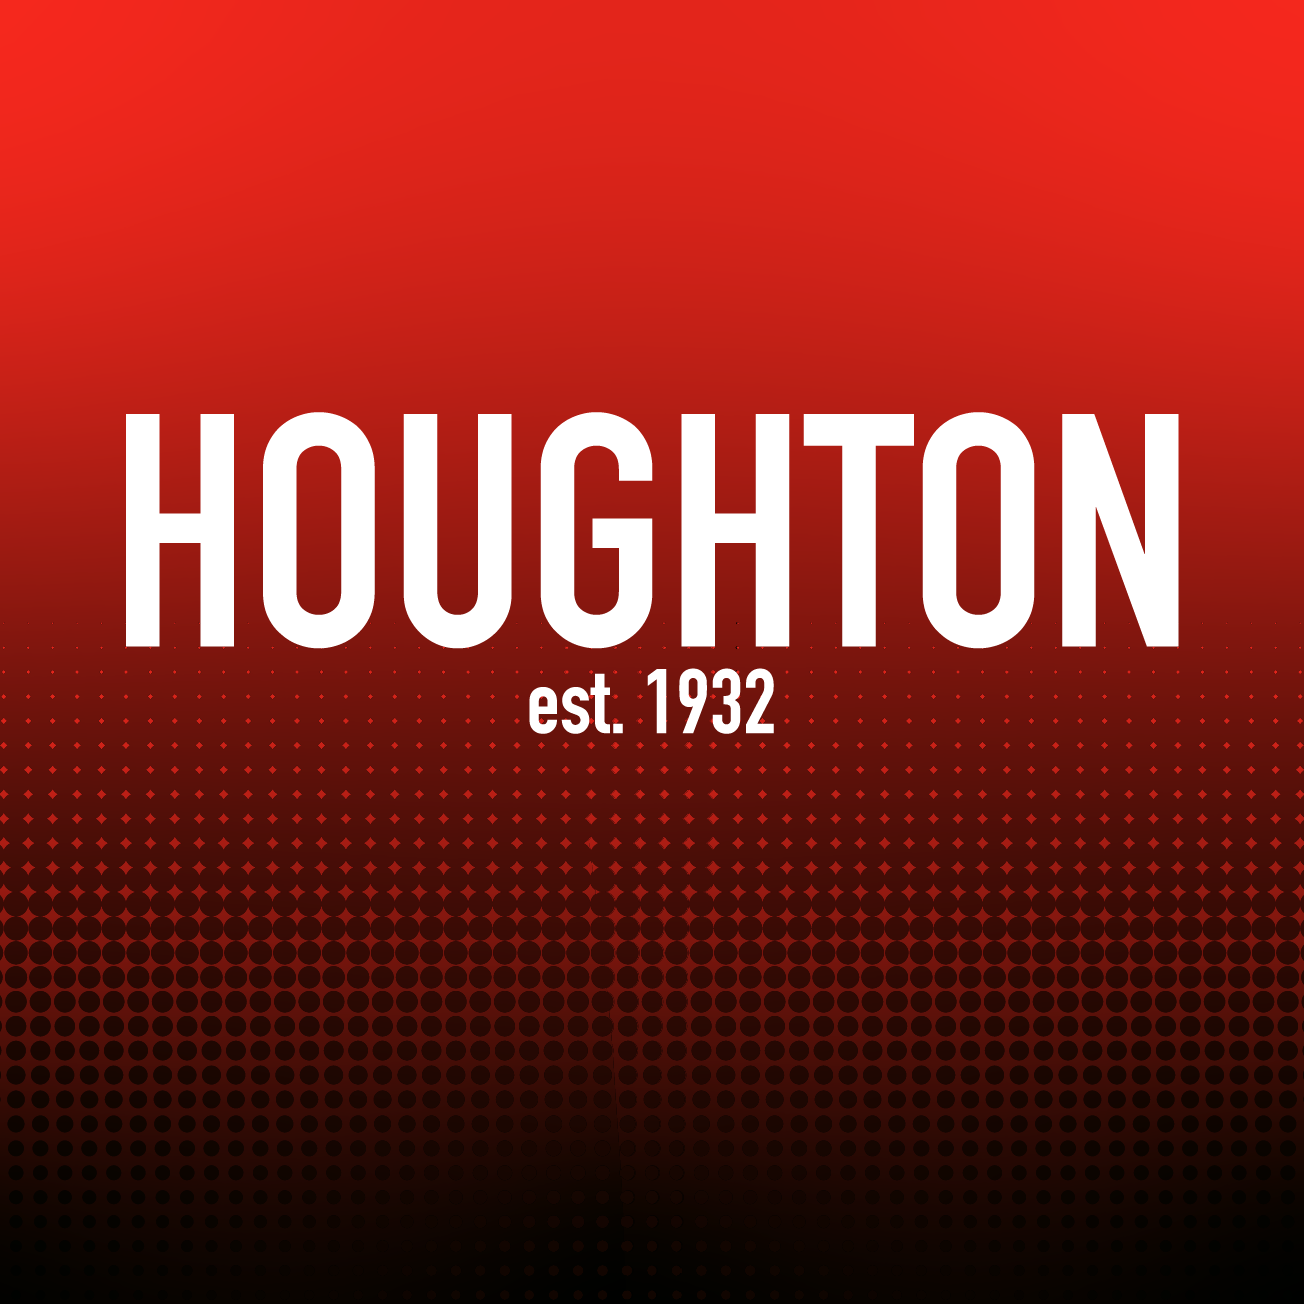 Club Image for HOUGHTON